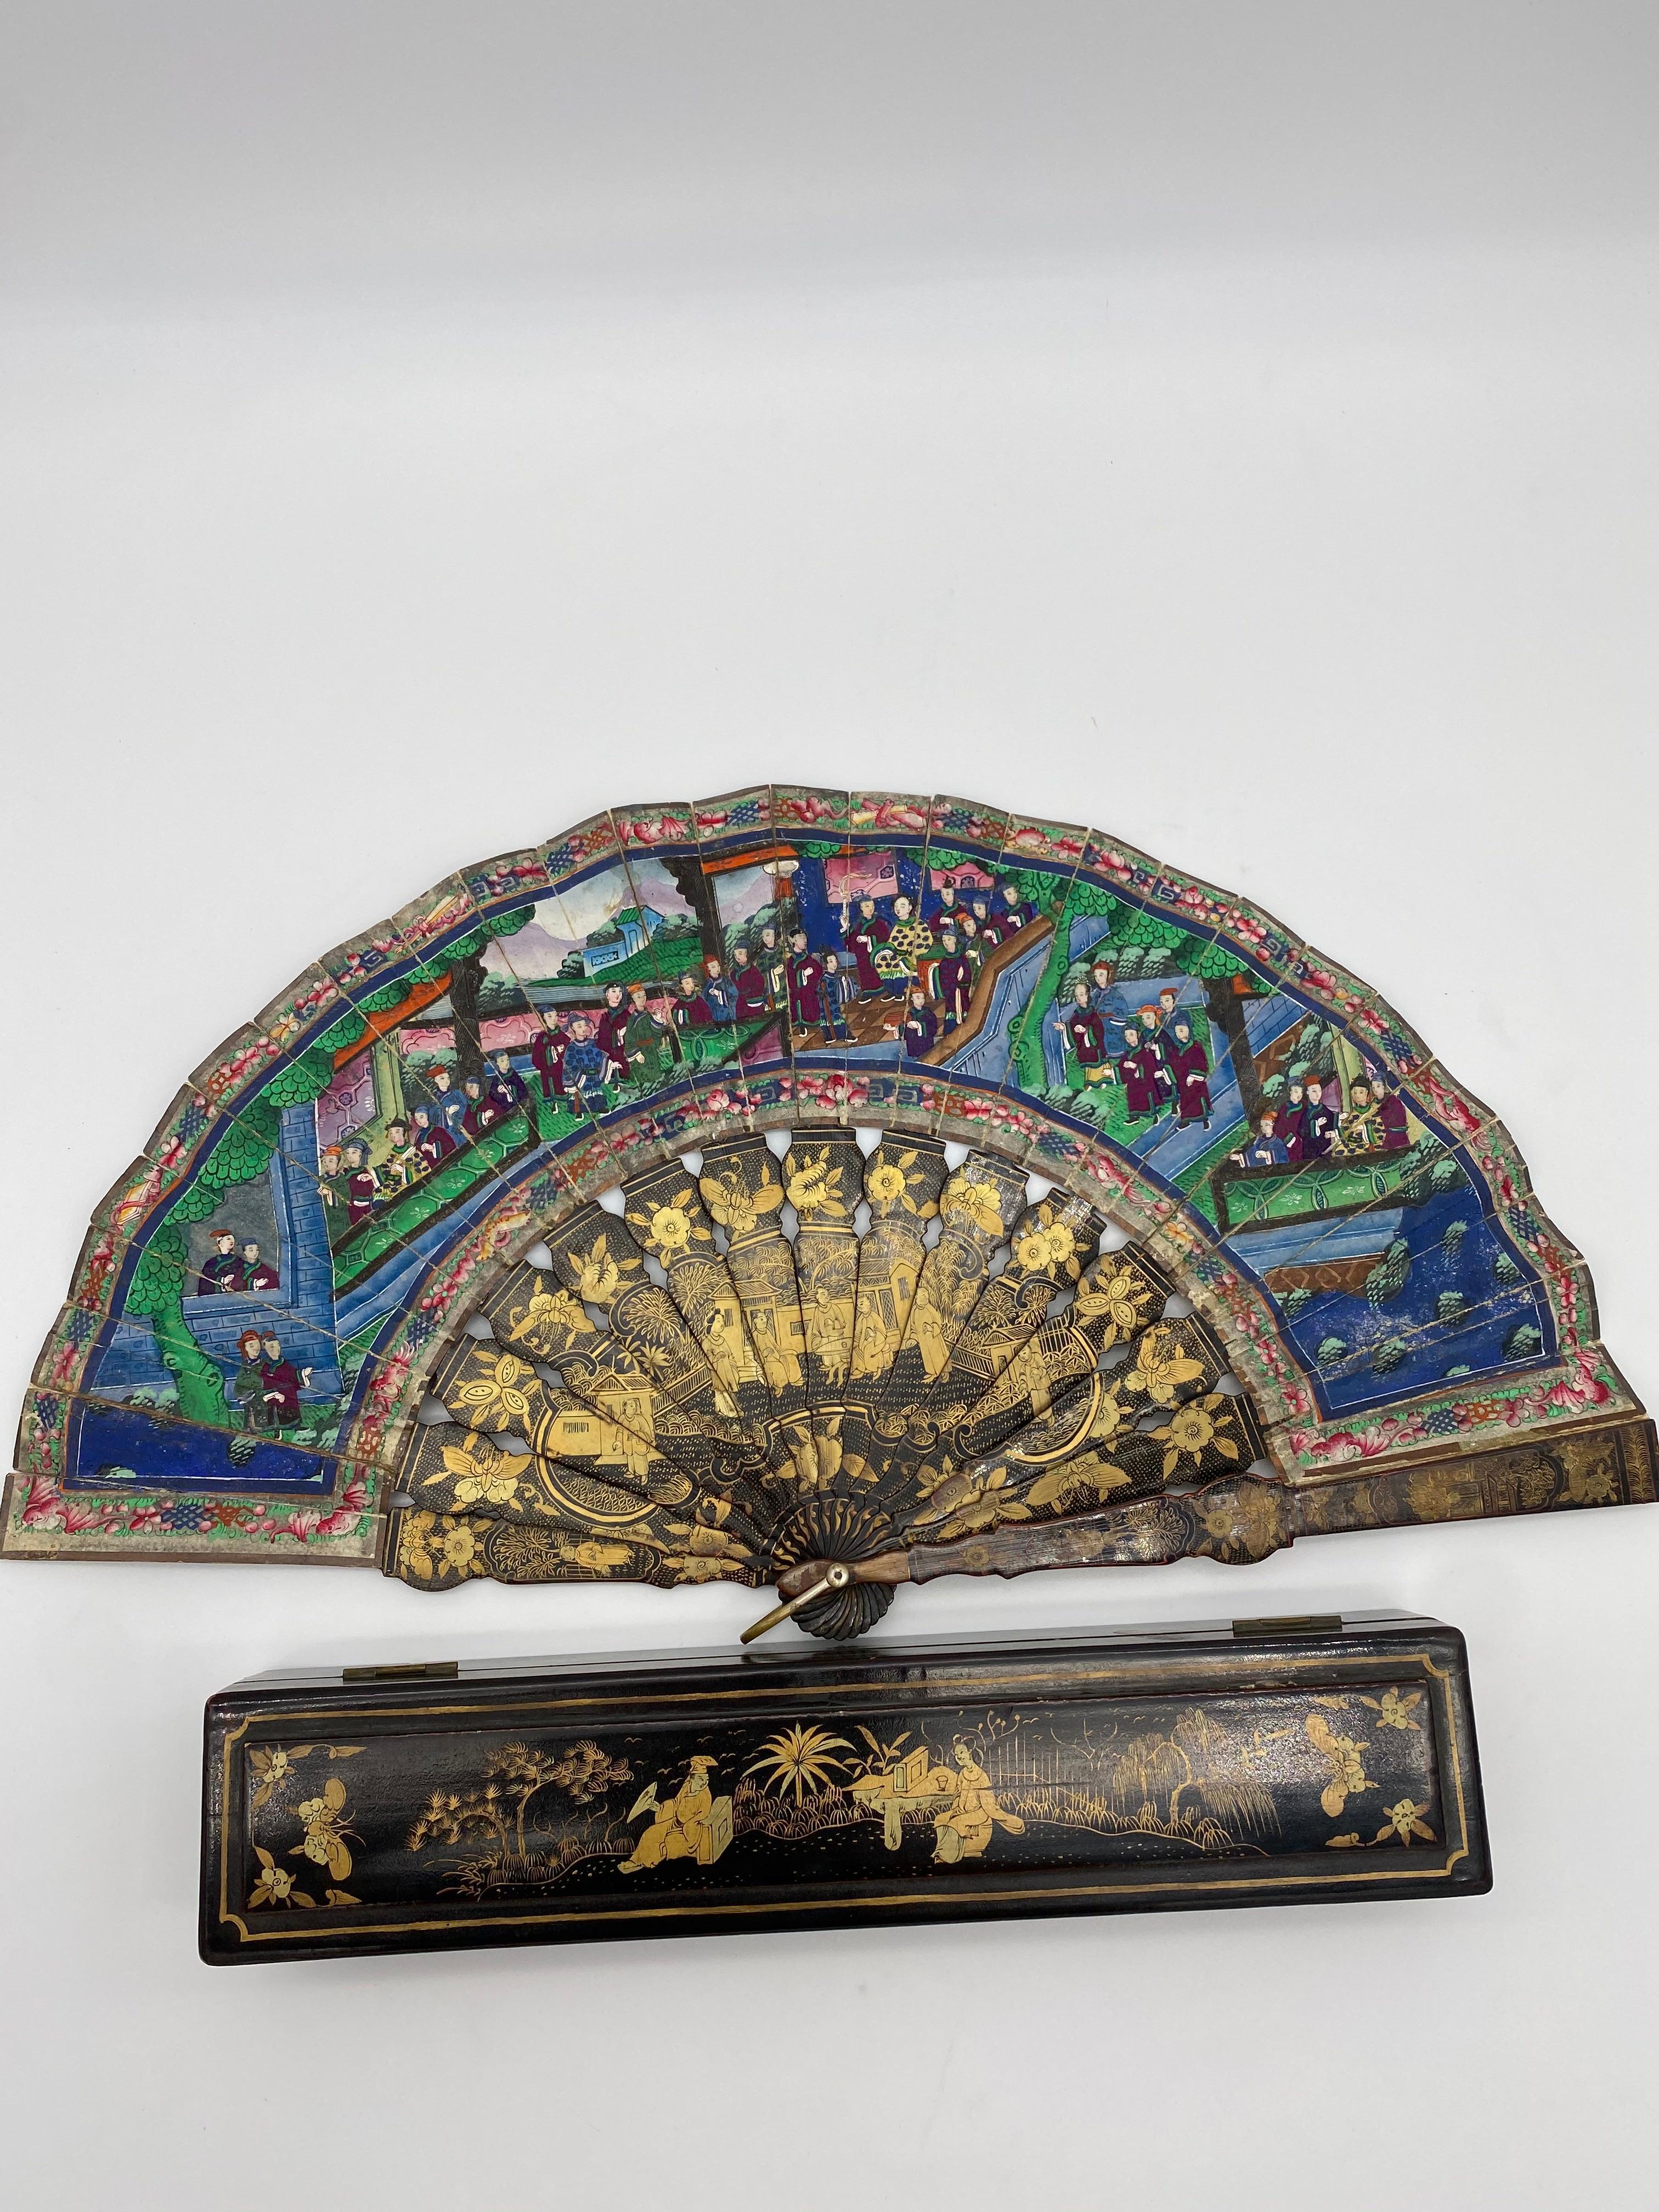 Hand-Carved 19th Century Chinese Gilt Lacquer Fan with Landscape 100 Faces